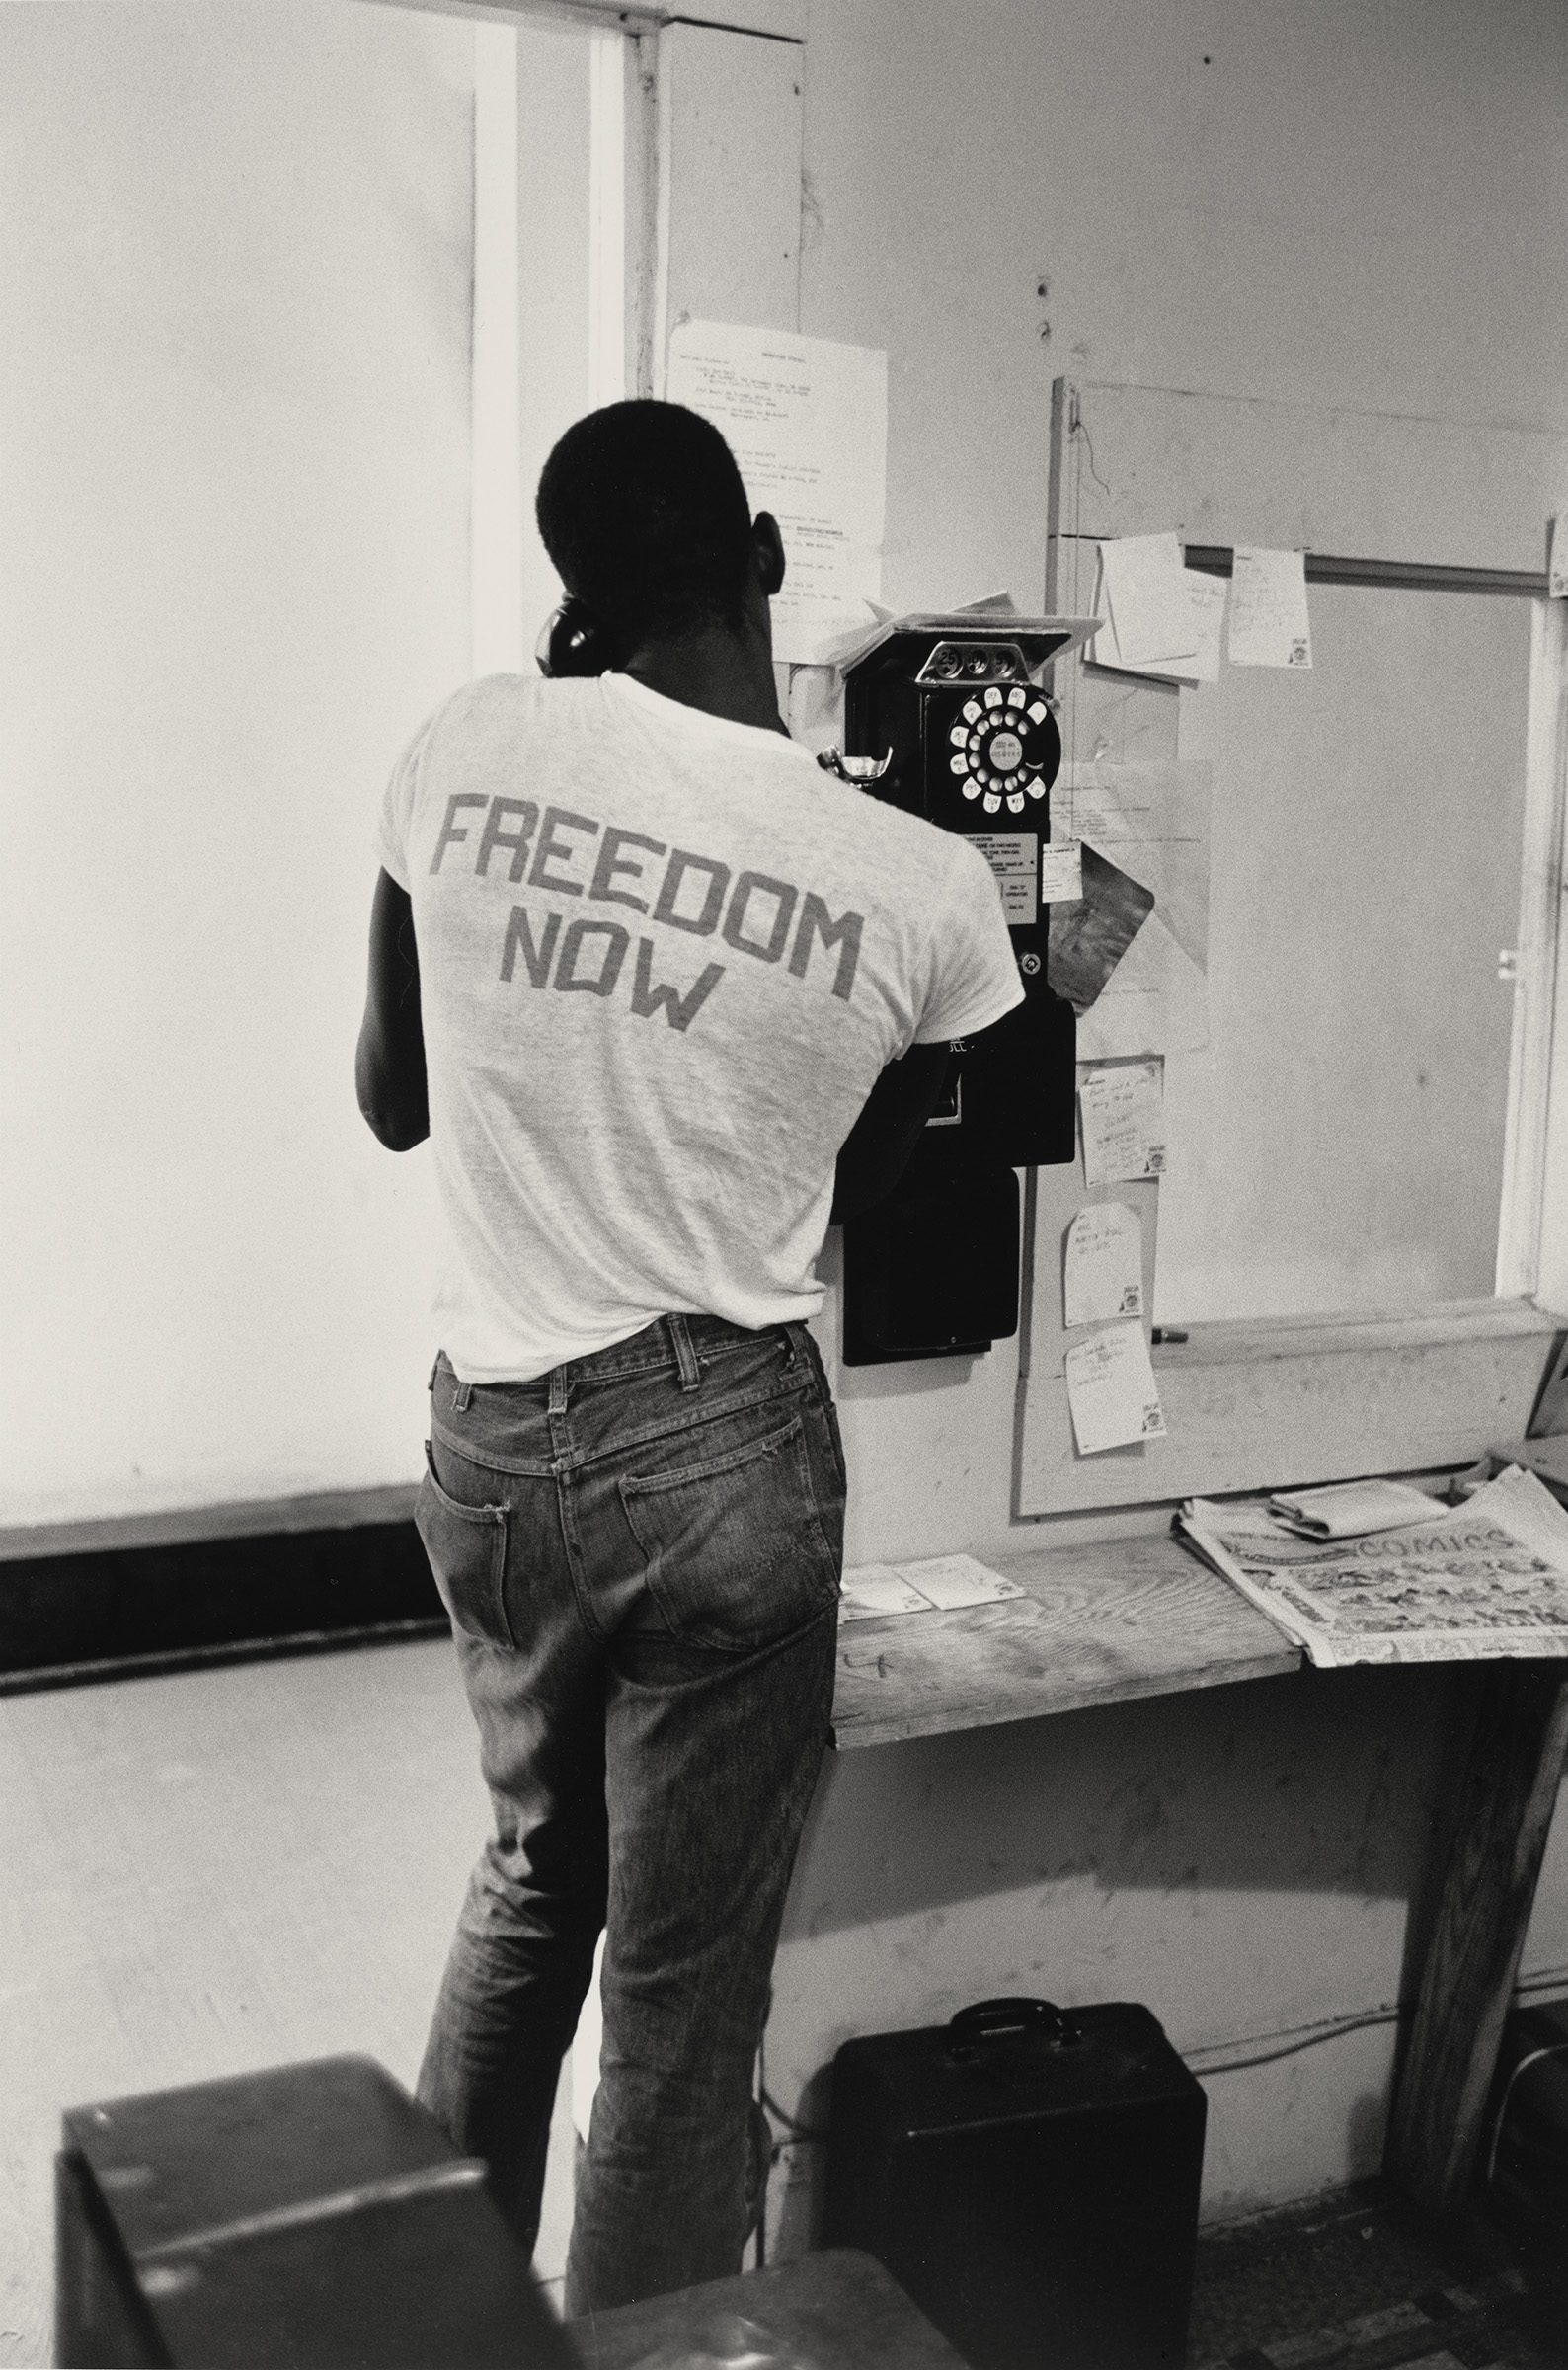 Freedom Now, 1964. Photograph by Steve Schapiro. A Black man is wearing a t-shirt that says 